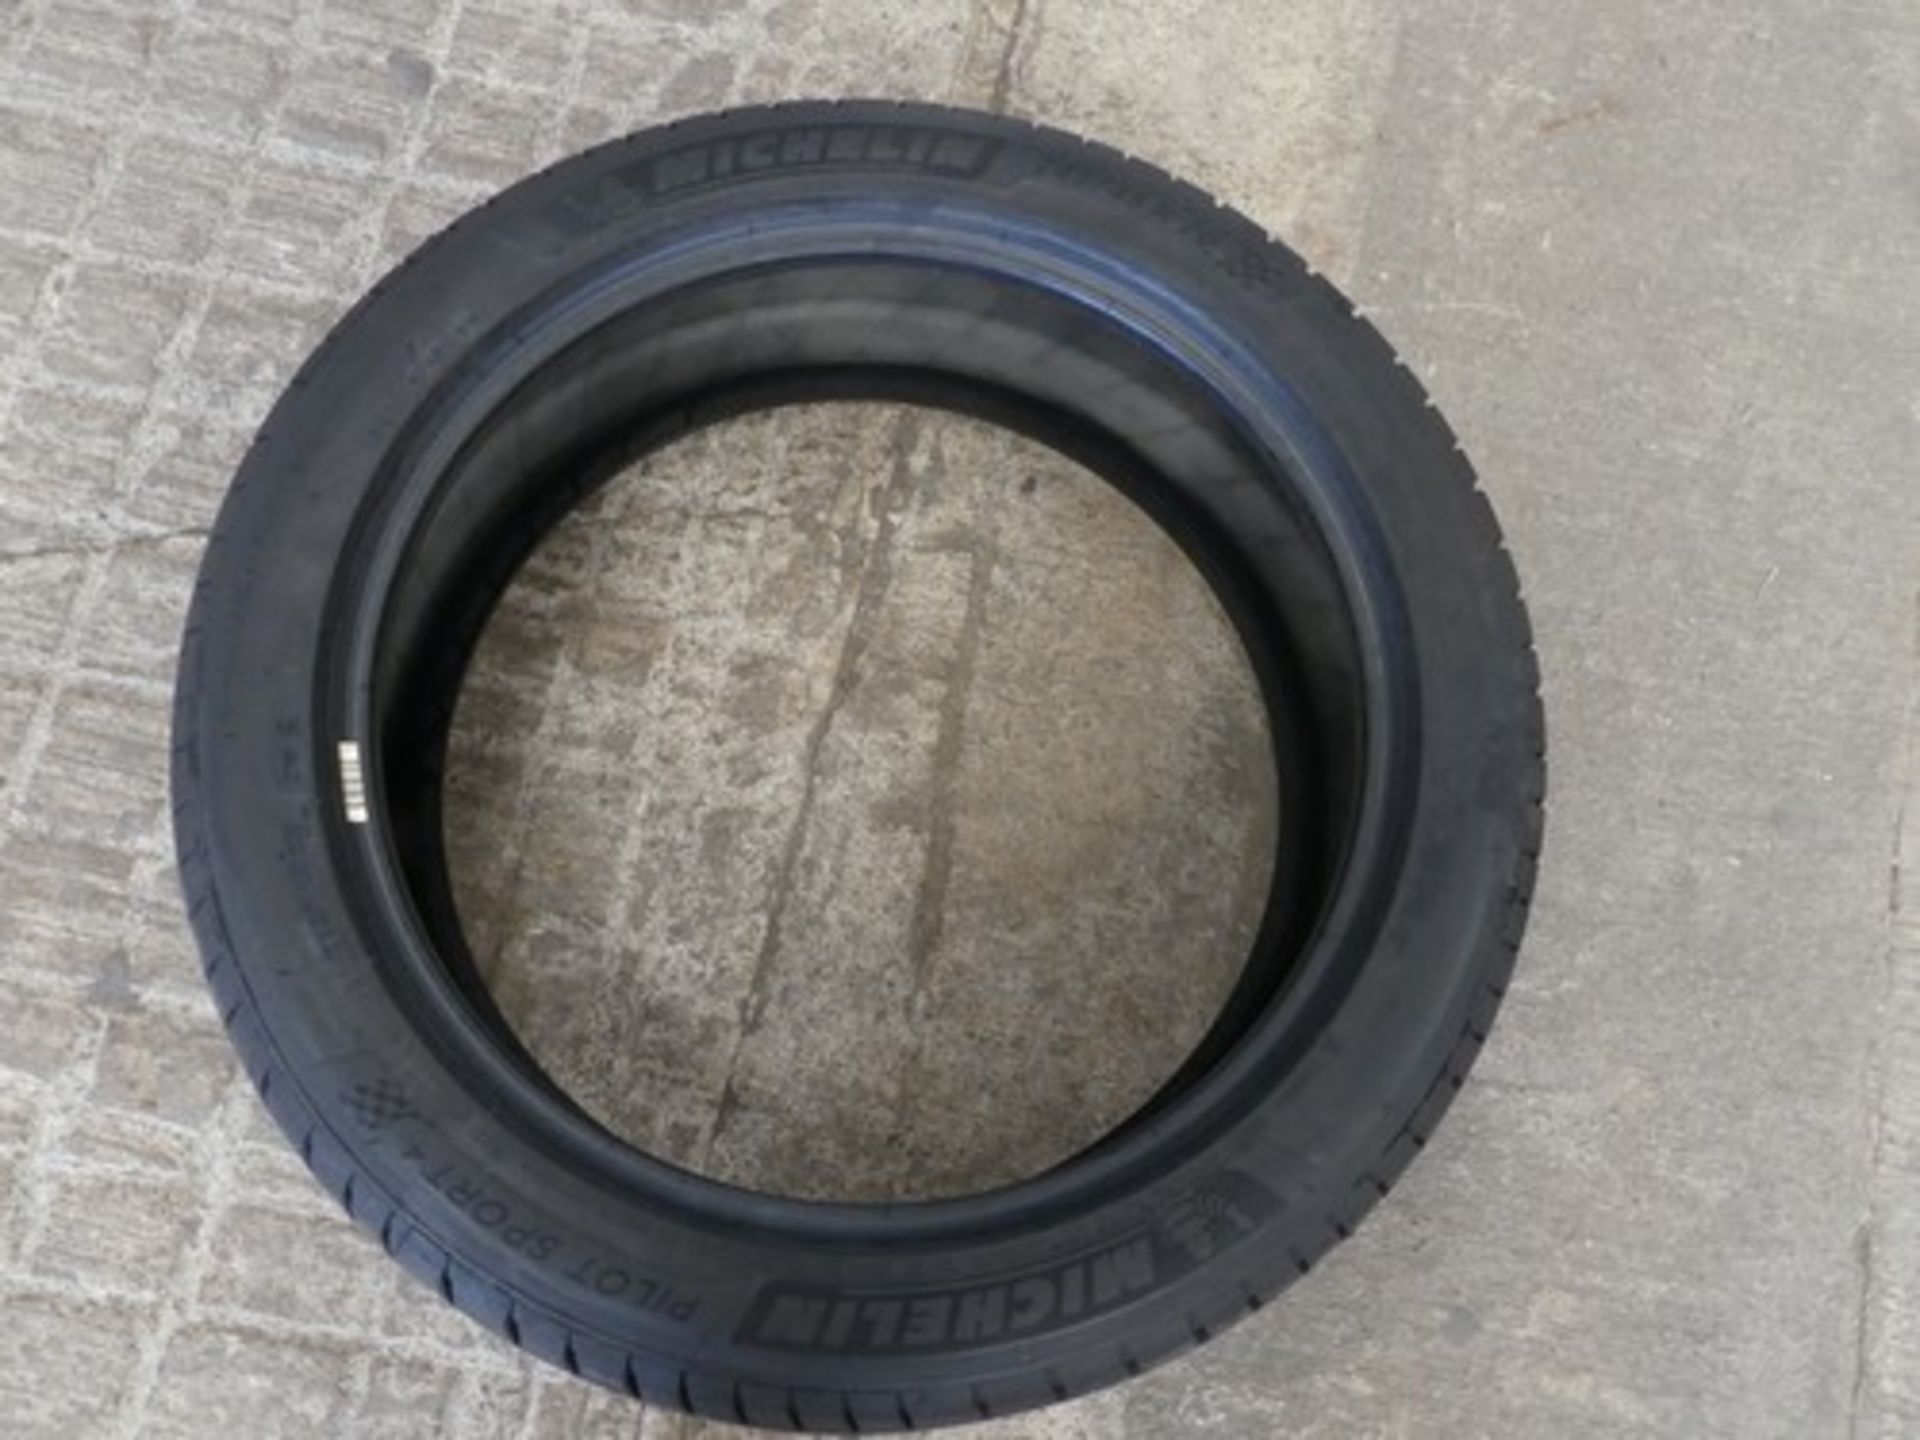 1 x Michelin Pilot Sport 4 tyre, size 245/45R20 103Y - New with label (pallet 1) - Image 2 of 2